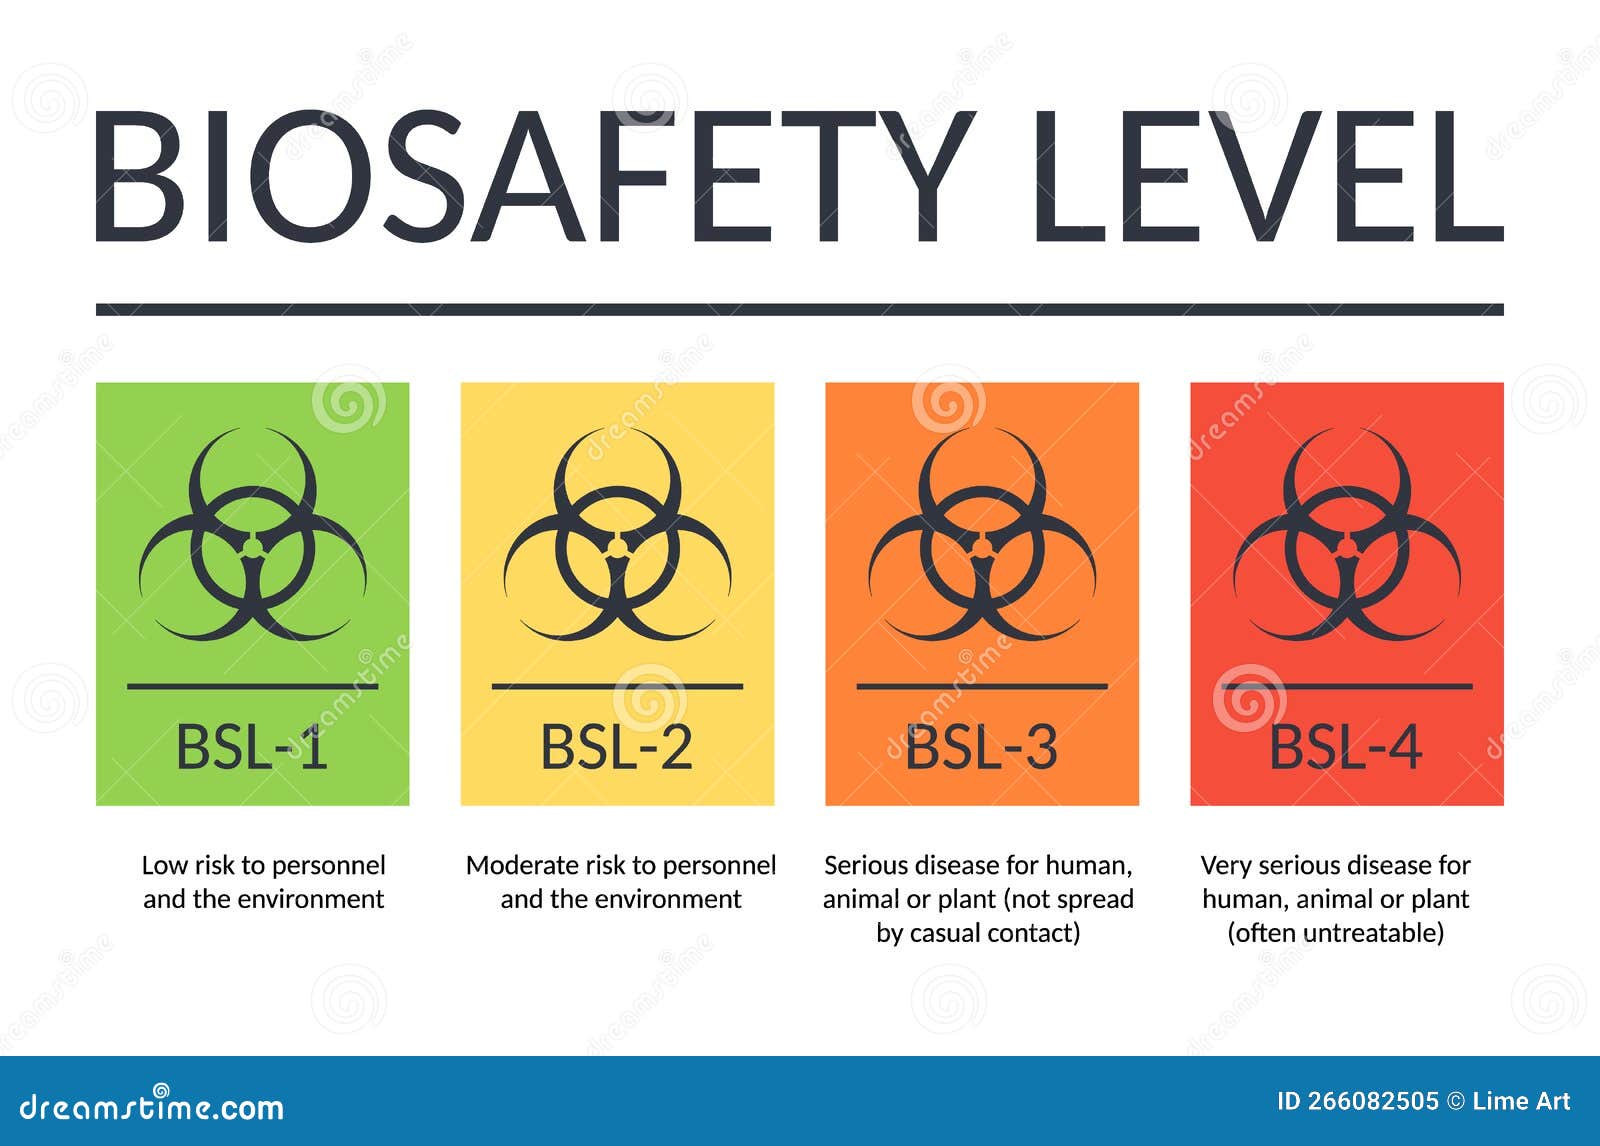  banner biosafety levels. signs bsl-1 bsl-2 bsl-3 bsl-4. laboratory biohazard . viruses bacteria bioweapons. from low